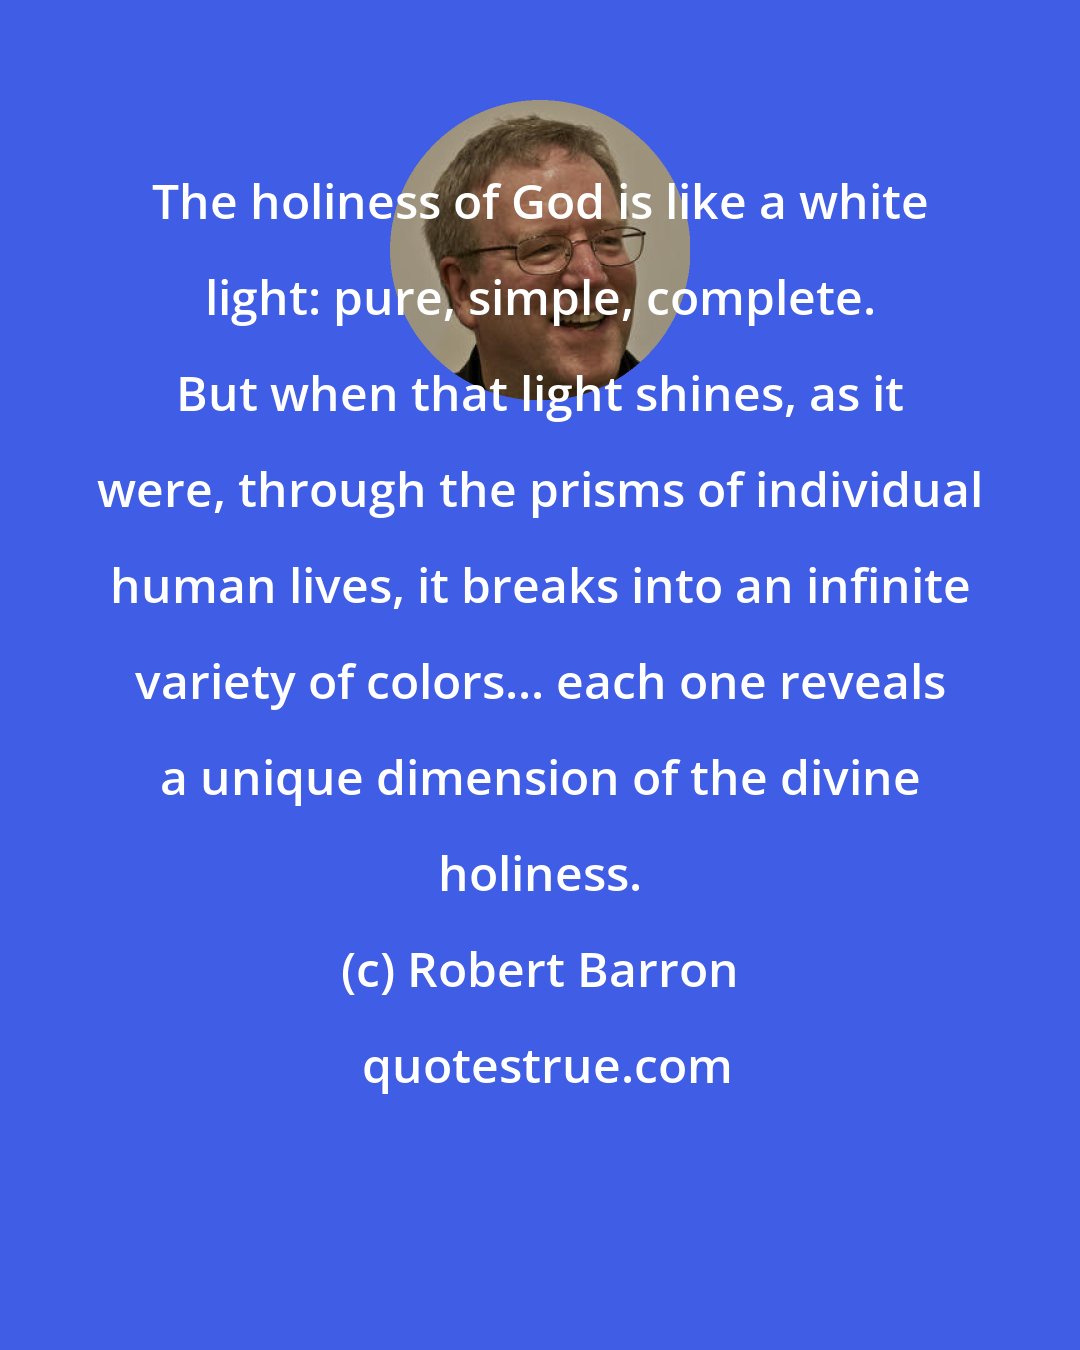 Robert Barron: The holiness of God is like a white light: pure, simple, complete. But when that light shines, as it were, through the prisms of individual human lives, it breaks into an infinite variety of colors... each one reveals a unique dimension of the divine holiness.